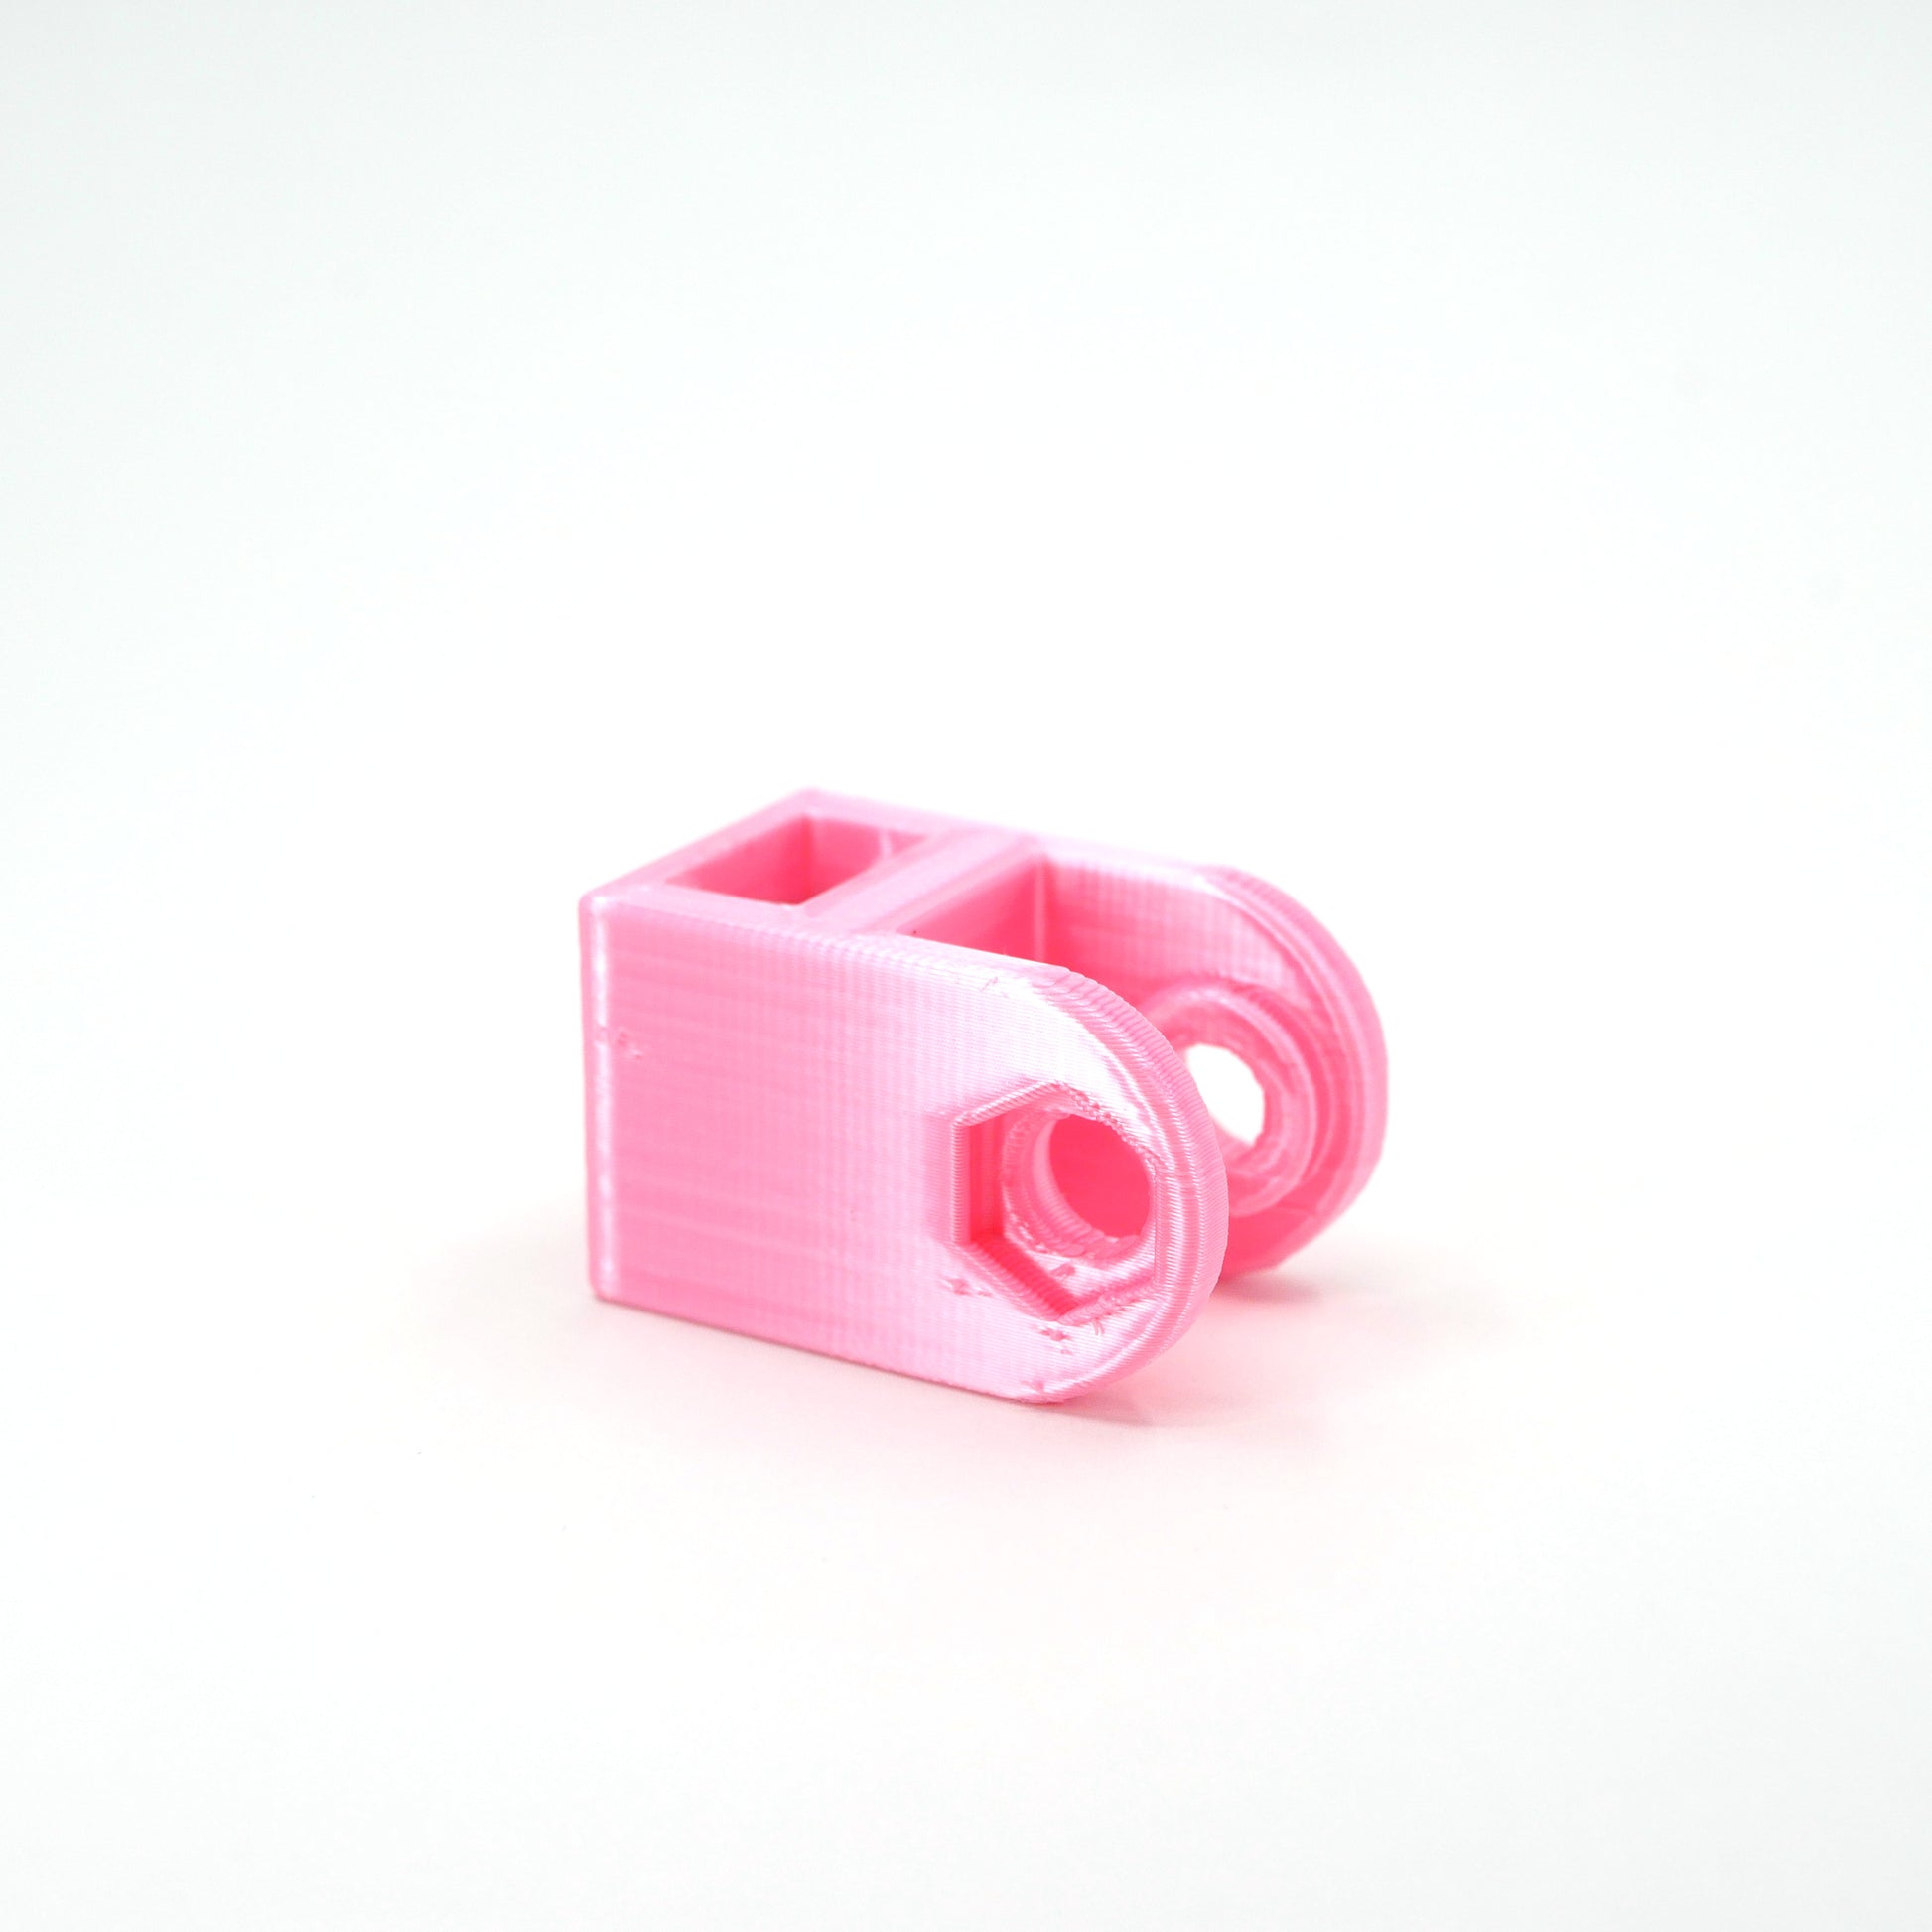 A pink HyperX QuadCast microphone mount adapter.